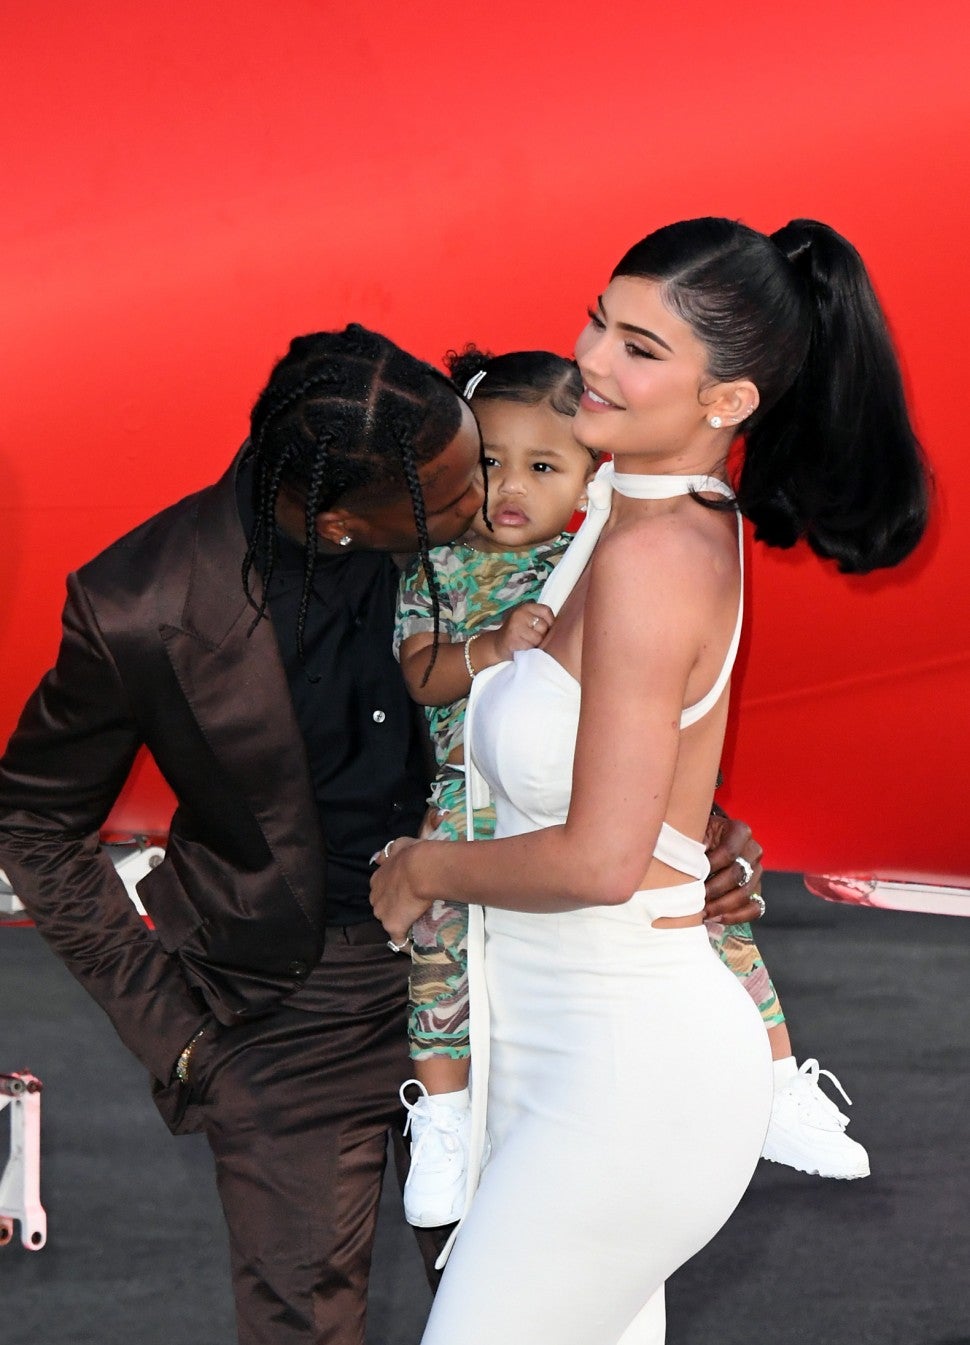 Travis Scott, Stormi Webster, and Kylie Jenner at the premiere of Netflix's "Travis Scott: Look Mom I Can Fly" 